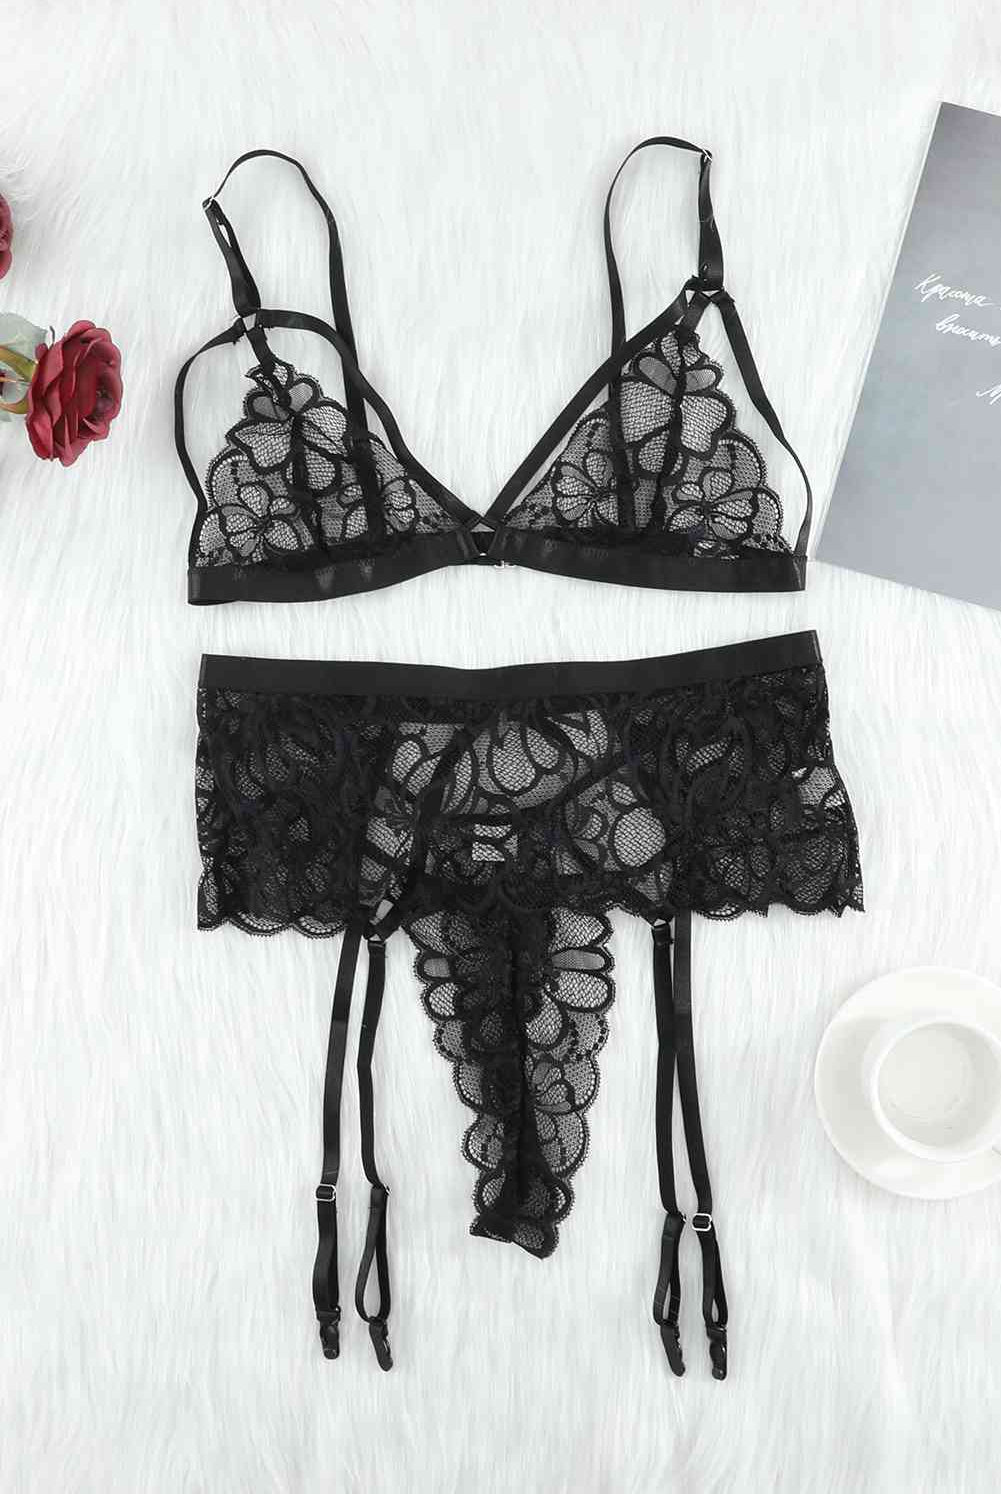 Strappy Three-Piece Lace Lingerie Set - GemThreads Boutique